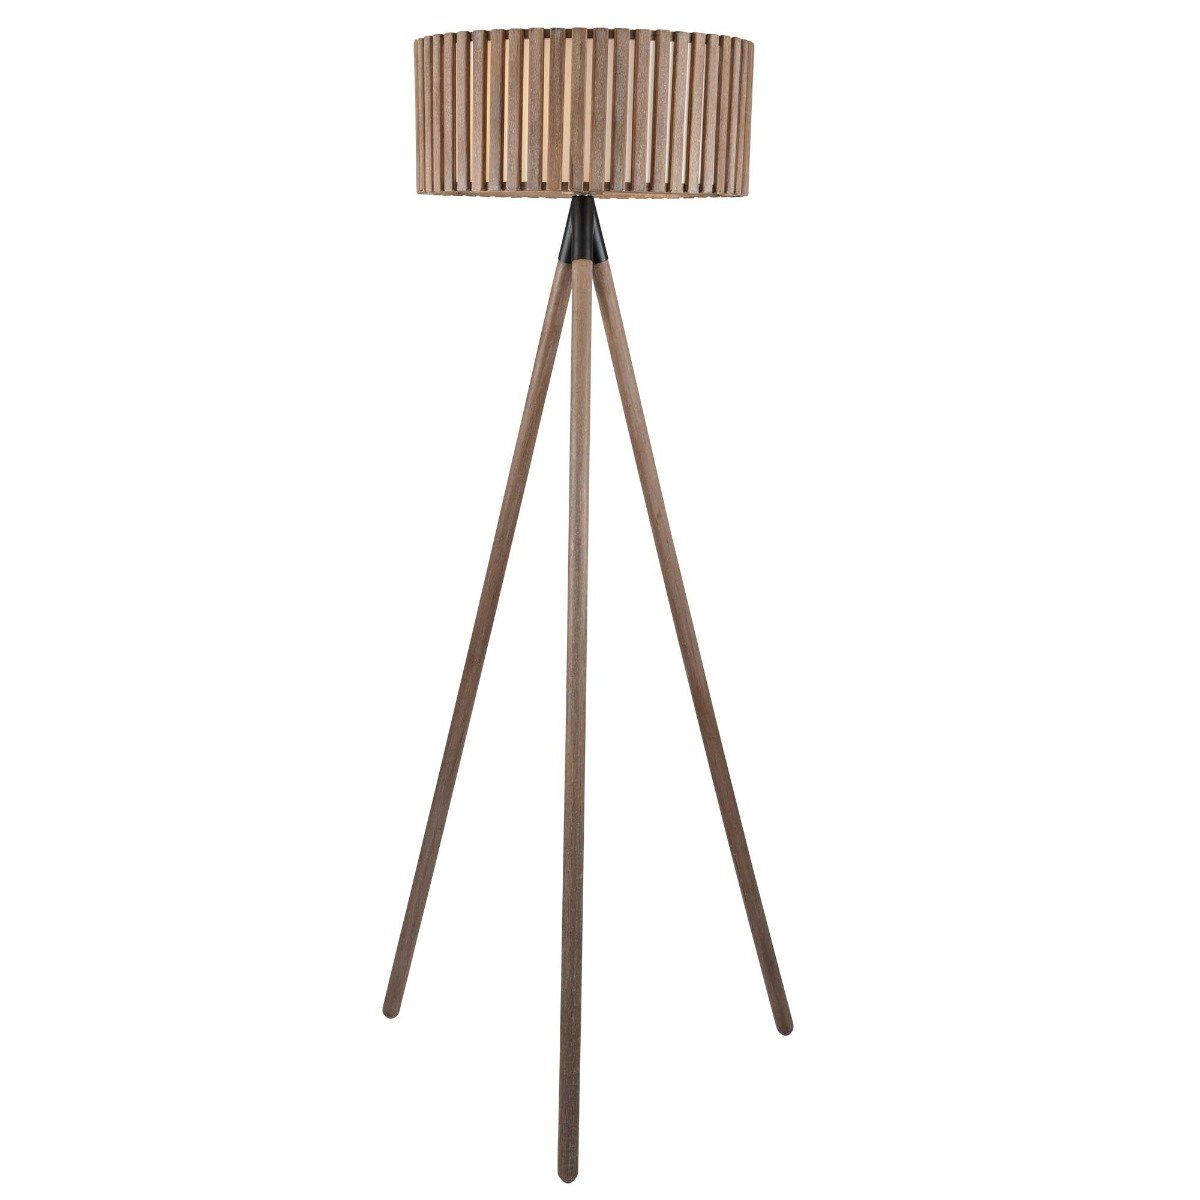 Accessories Slatted Tripod Floor Lamp, Antique Wood - Barker & Stonehouse